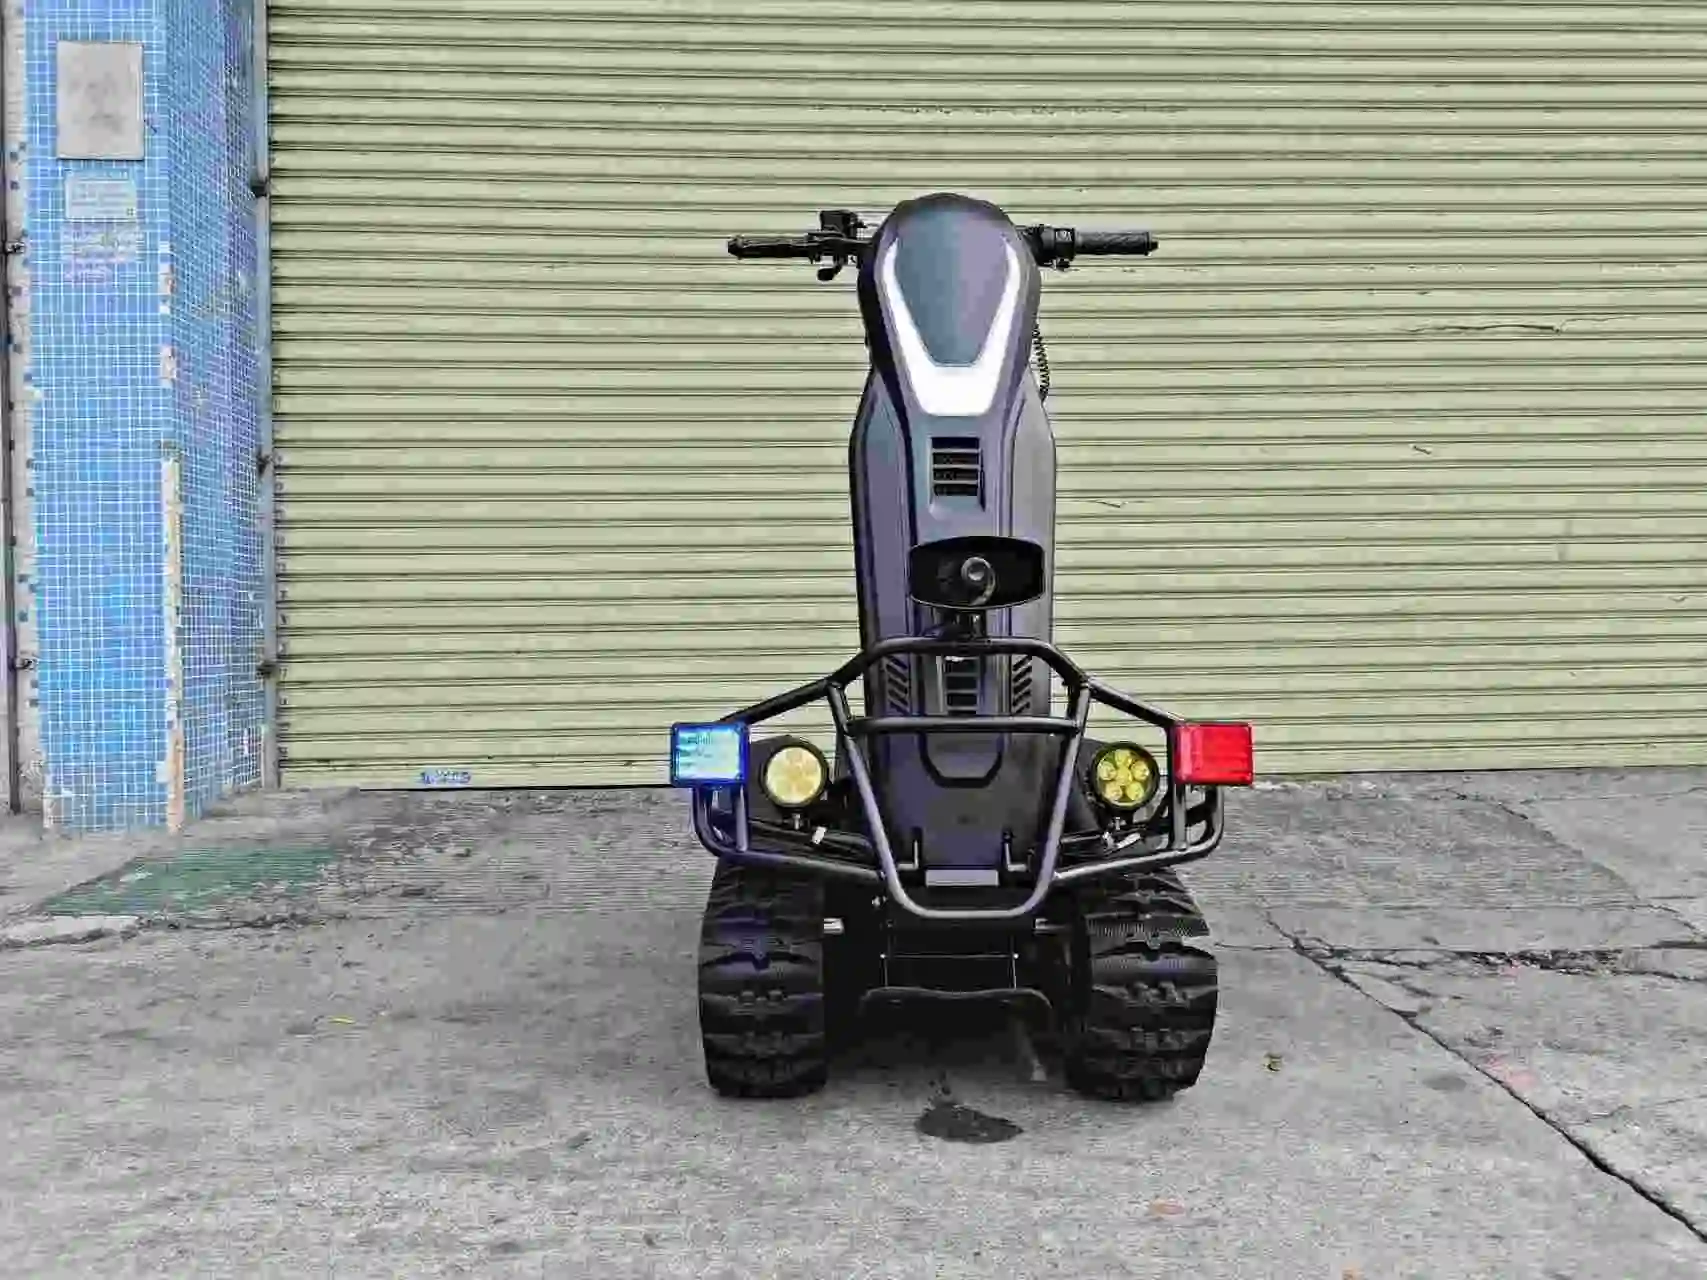 Innovative All-Terrain Vehicle Unveiled as a New Police Tool